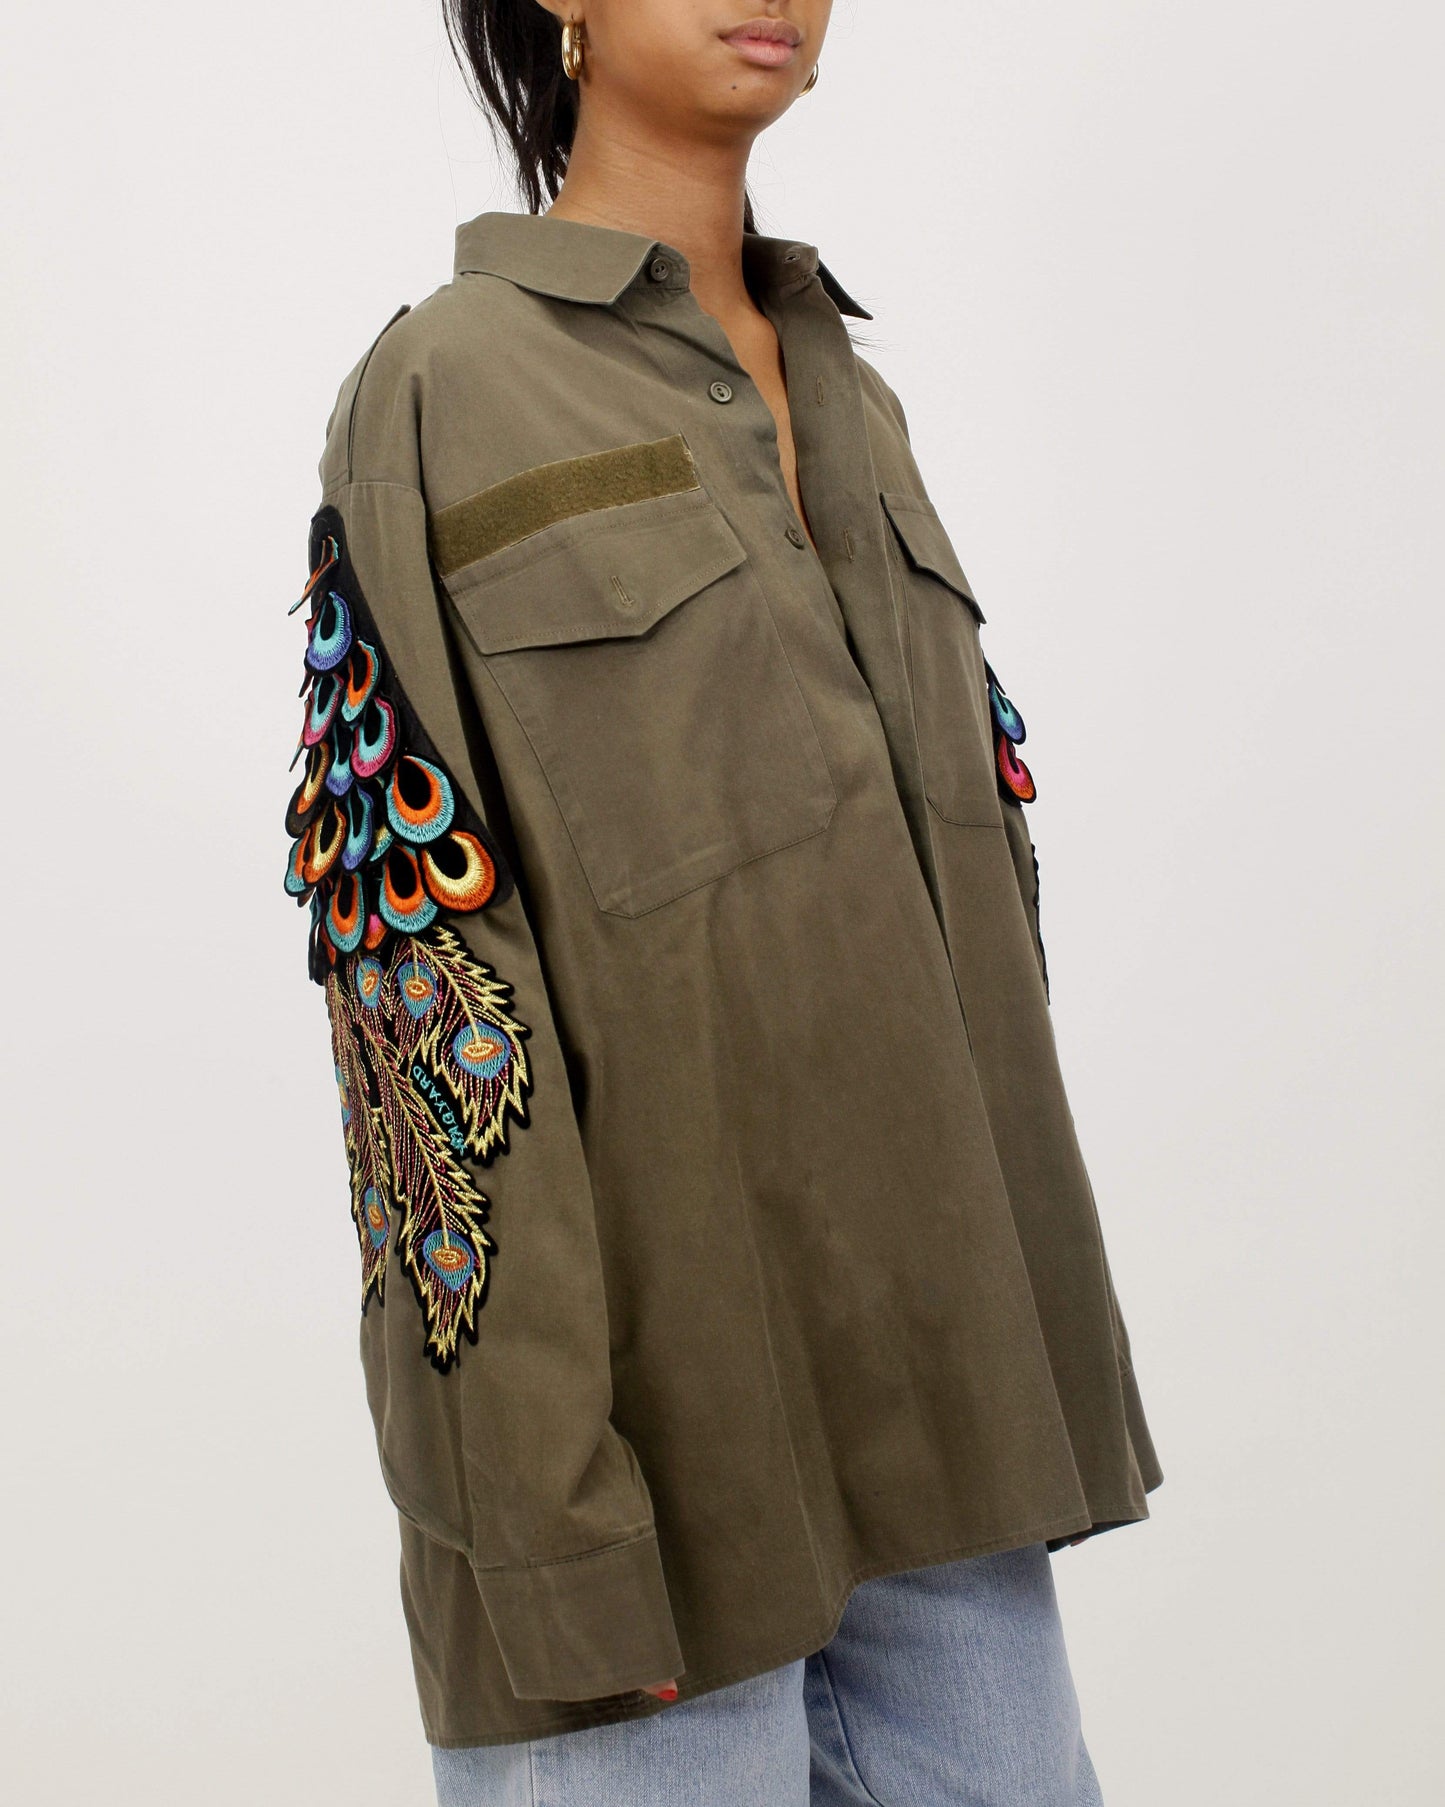 Evergreen - Khaki Psychedelic Peacock Patch Military Shirt